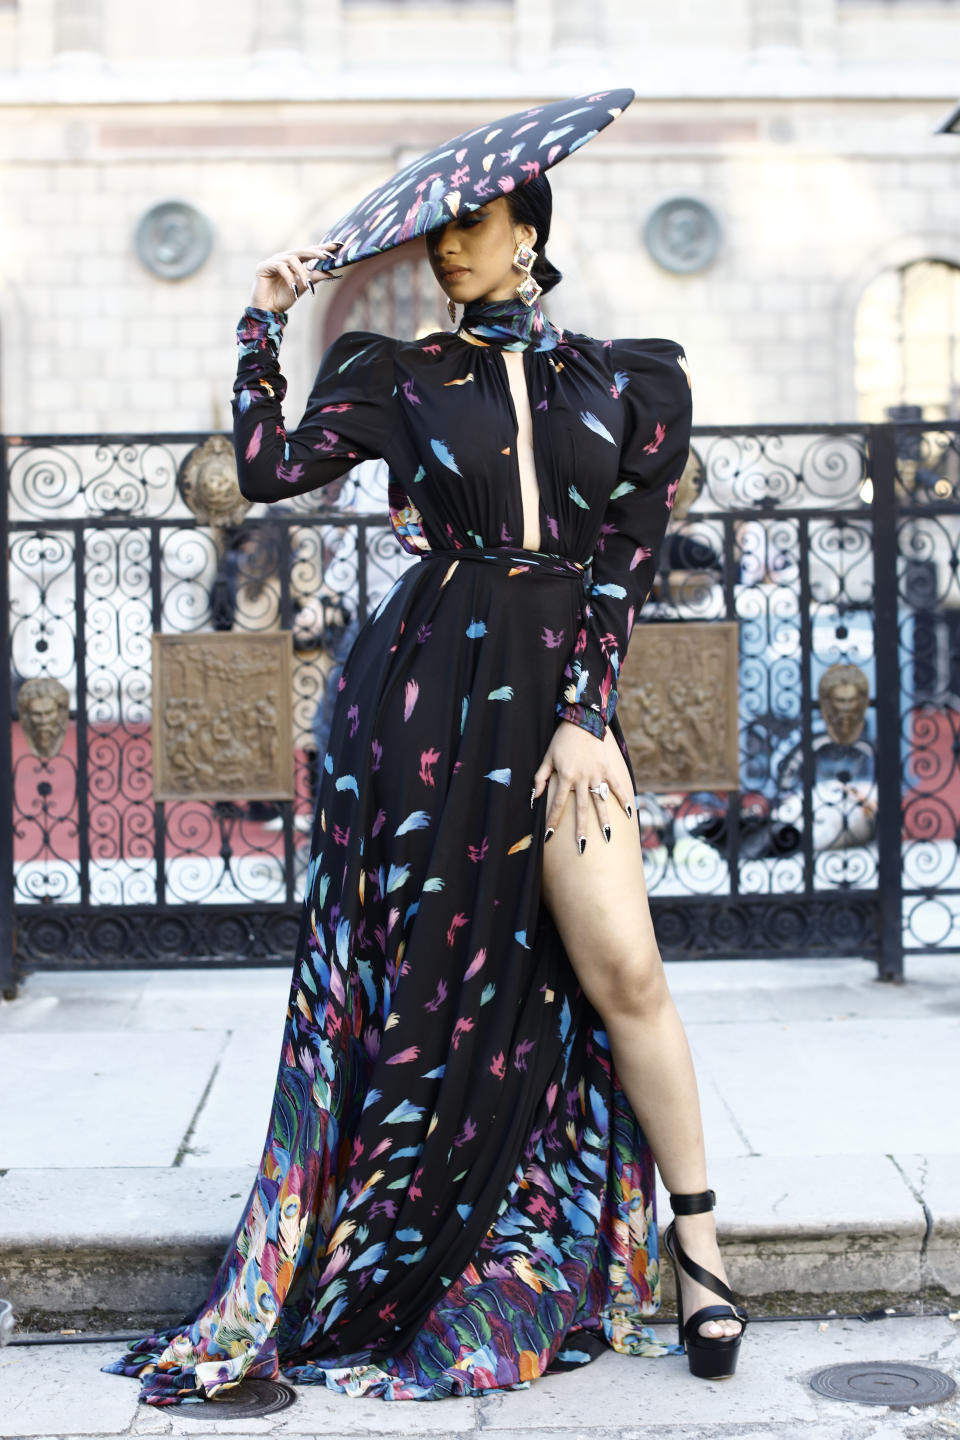 Singer Cardi b poses in Paris, France On September 25, 2018. (Photo by Mehdi Taamallah/NurPhoto via Getty Images)